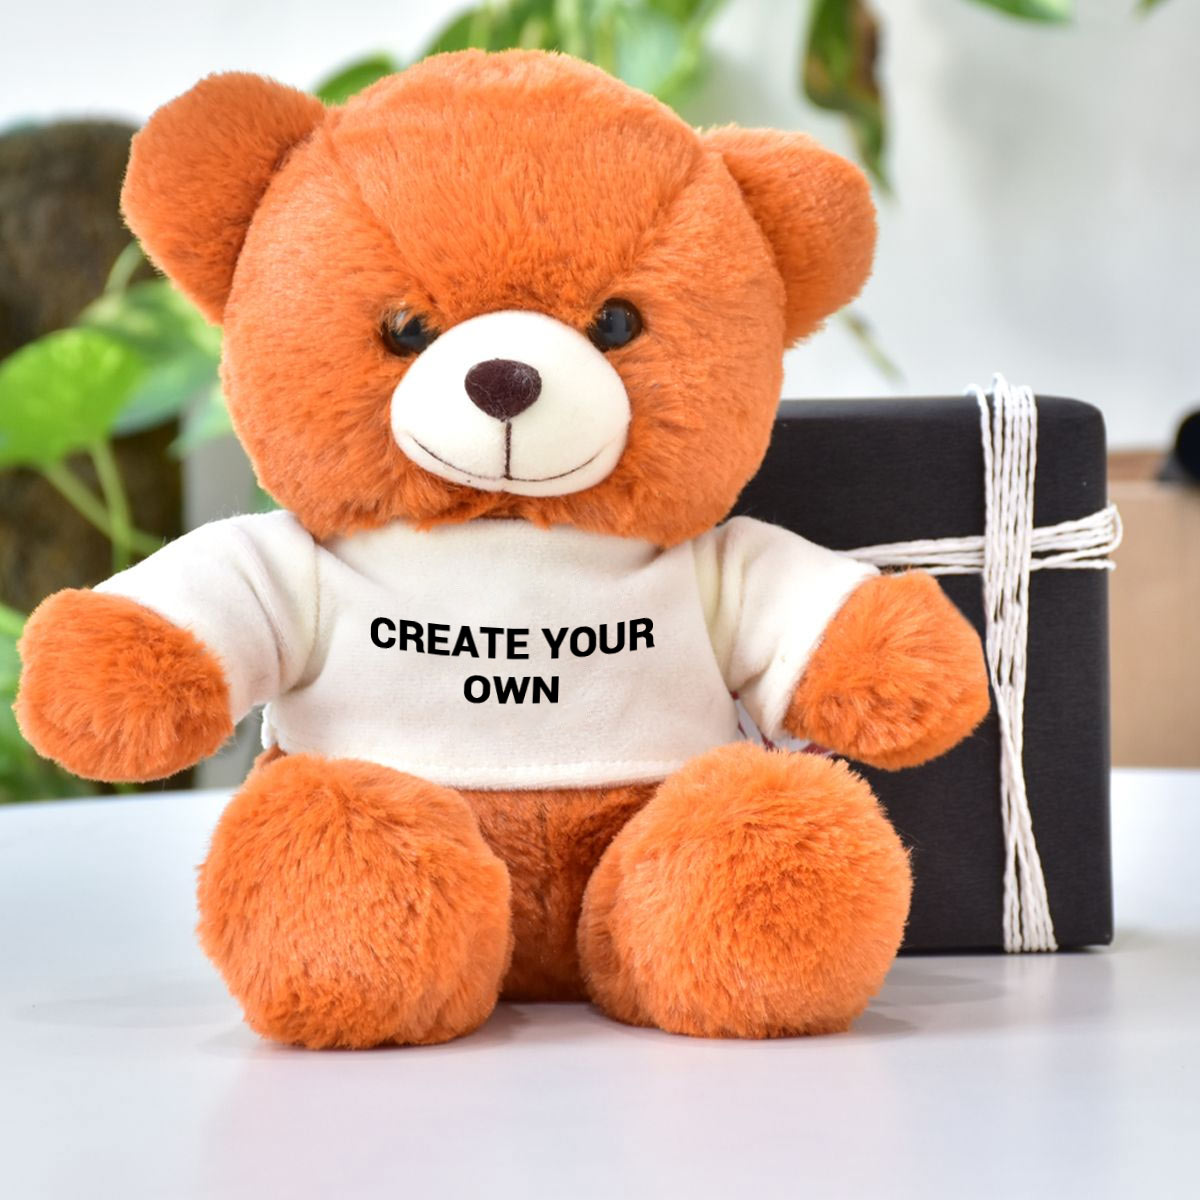 Create Your Own Teddy with T-Shirt